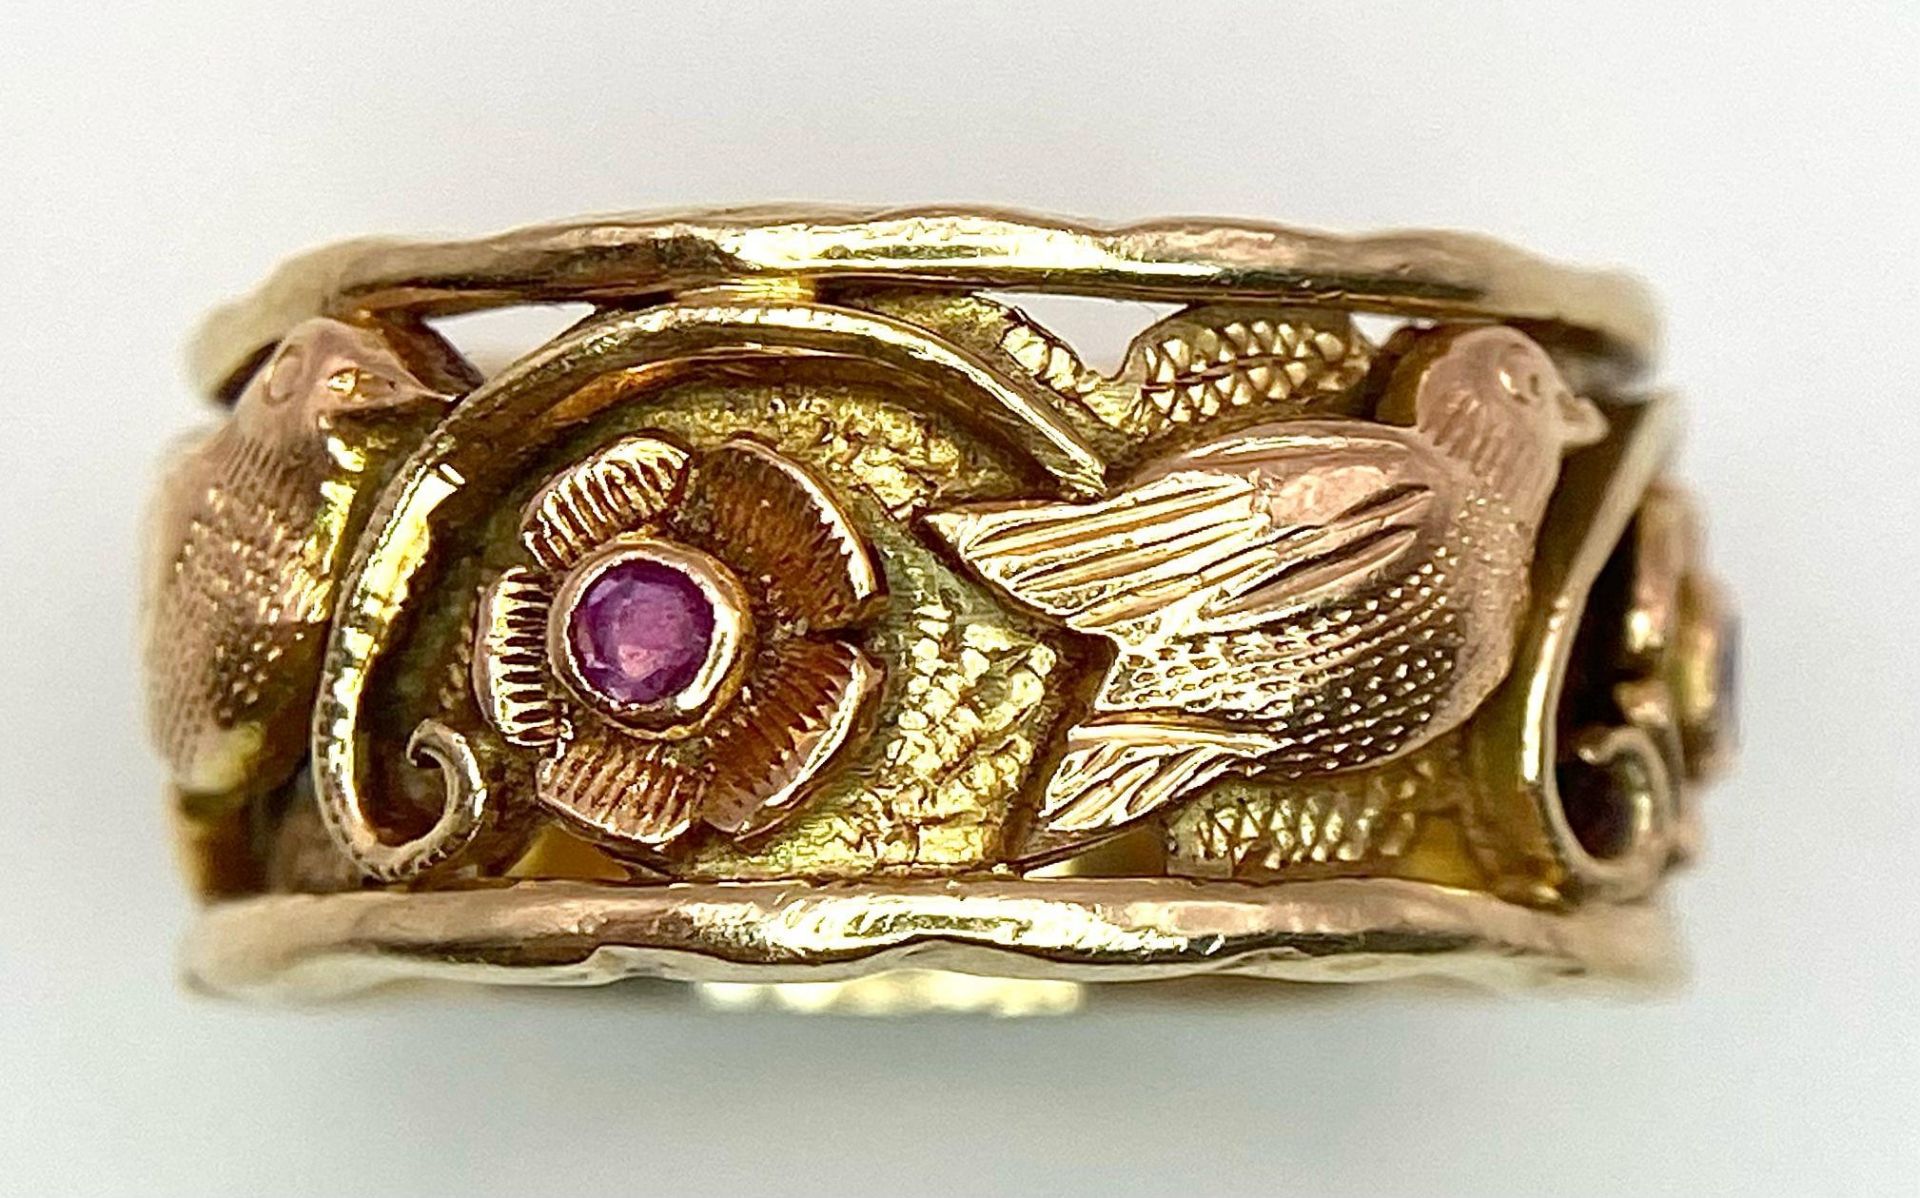 A Beautifully Decorated Bird and Floral 14K Rose Gold and Ruby Band Ring. Size N. 7.5g total weight. - Image 2 of 6